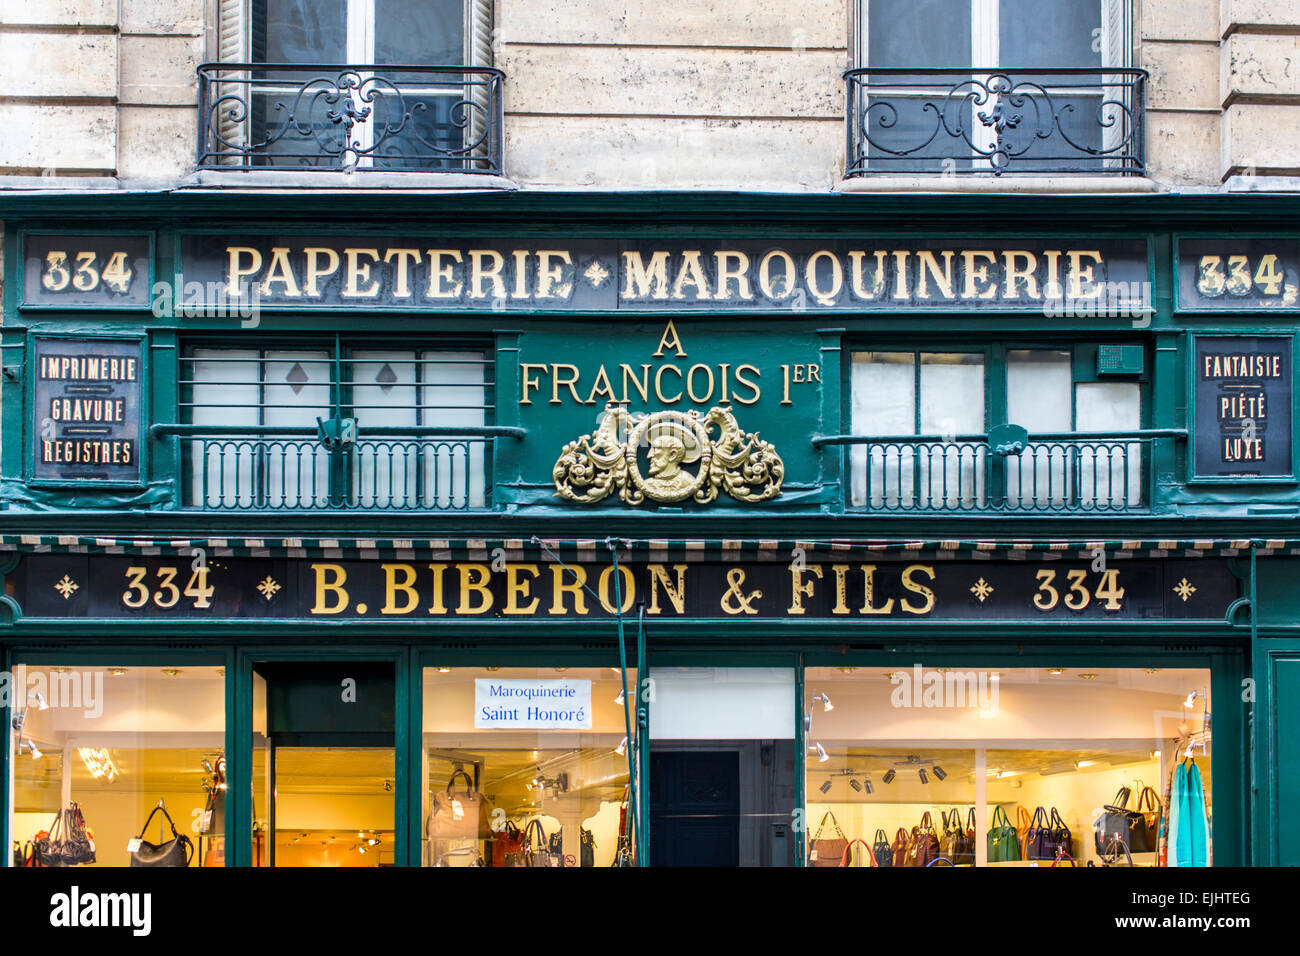 Paper and leather goods shop front, Paris, France Stock Photo